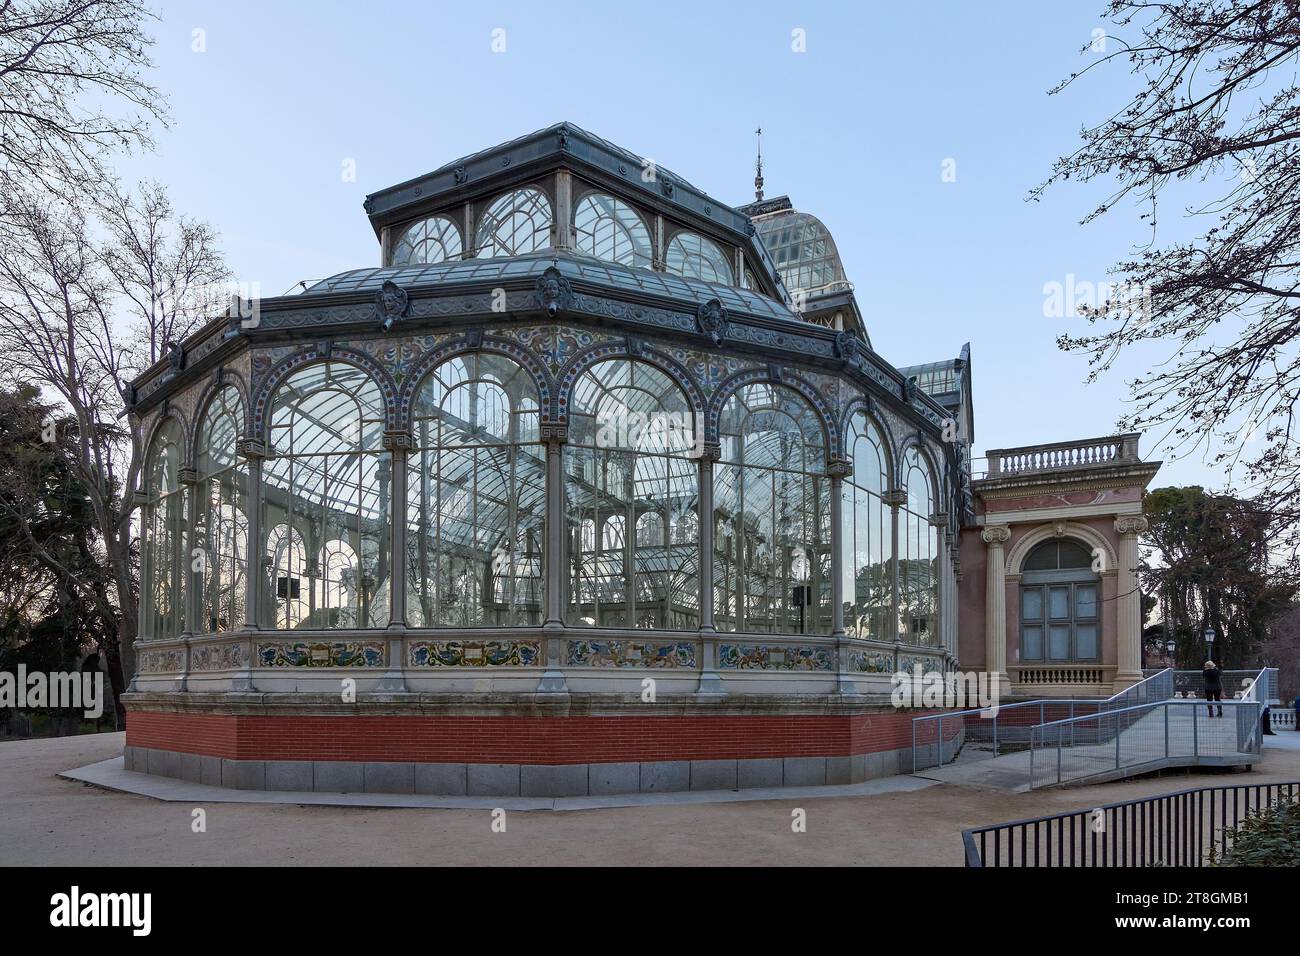 Victorian glass pavilion in a park at dusk, reflecting the twilight light. Stock Photo